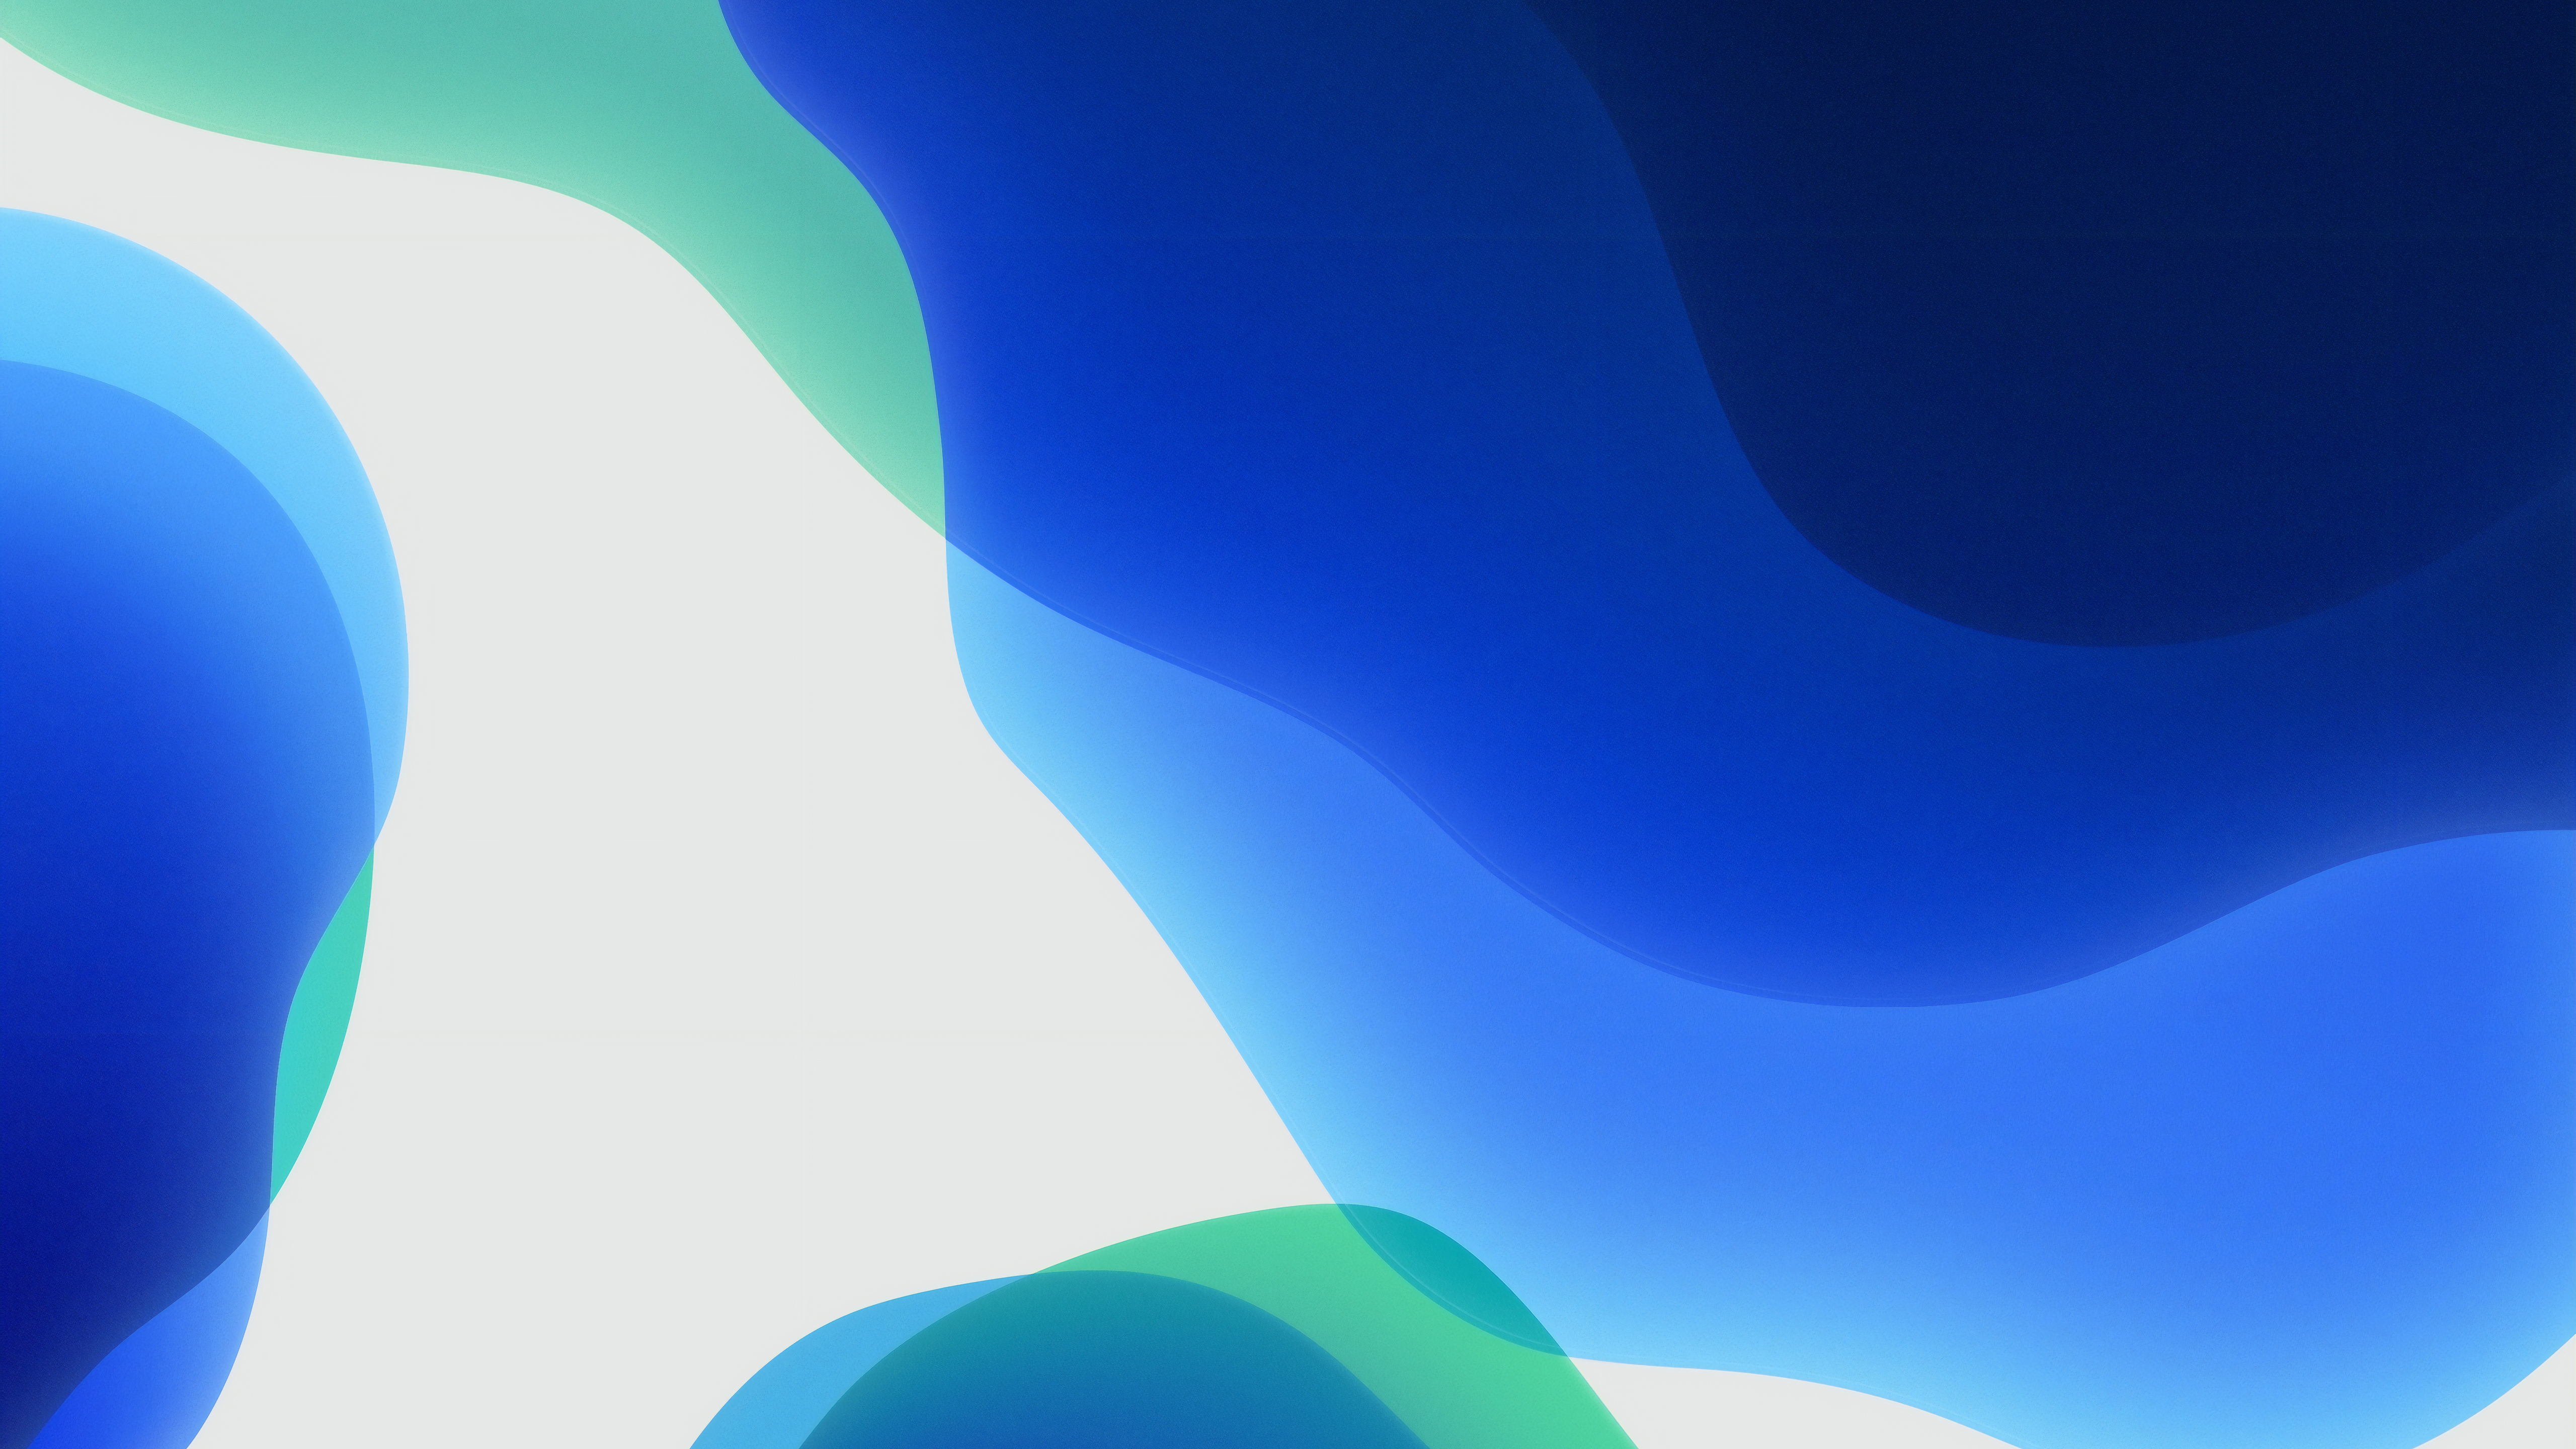 Blue and Light iOS 13 Wallpaper, HD Abstract 4K Wallpapers ...